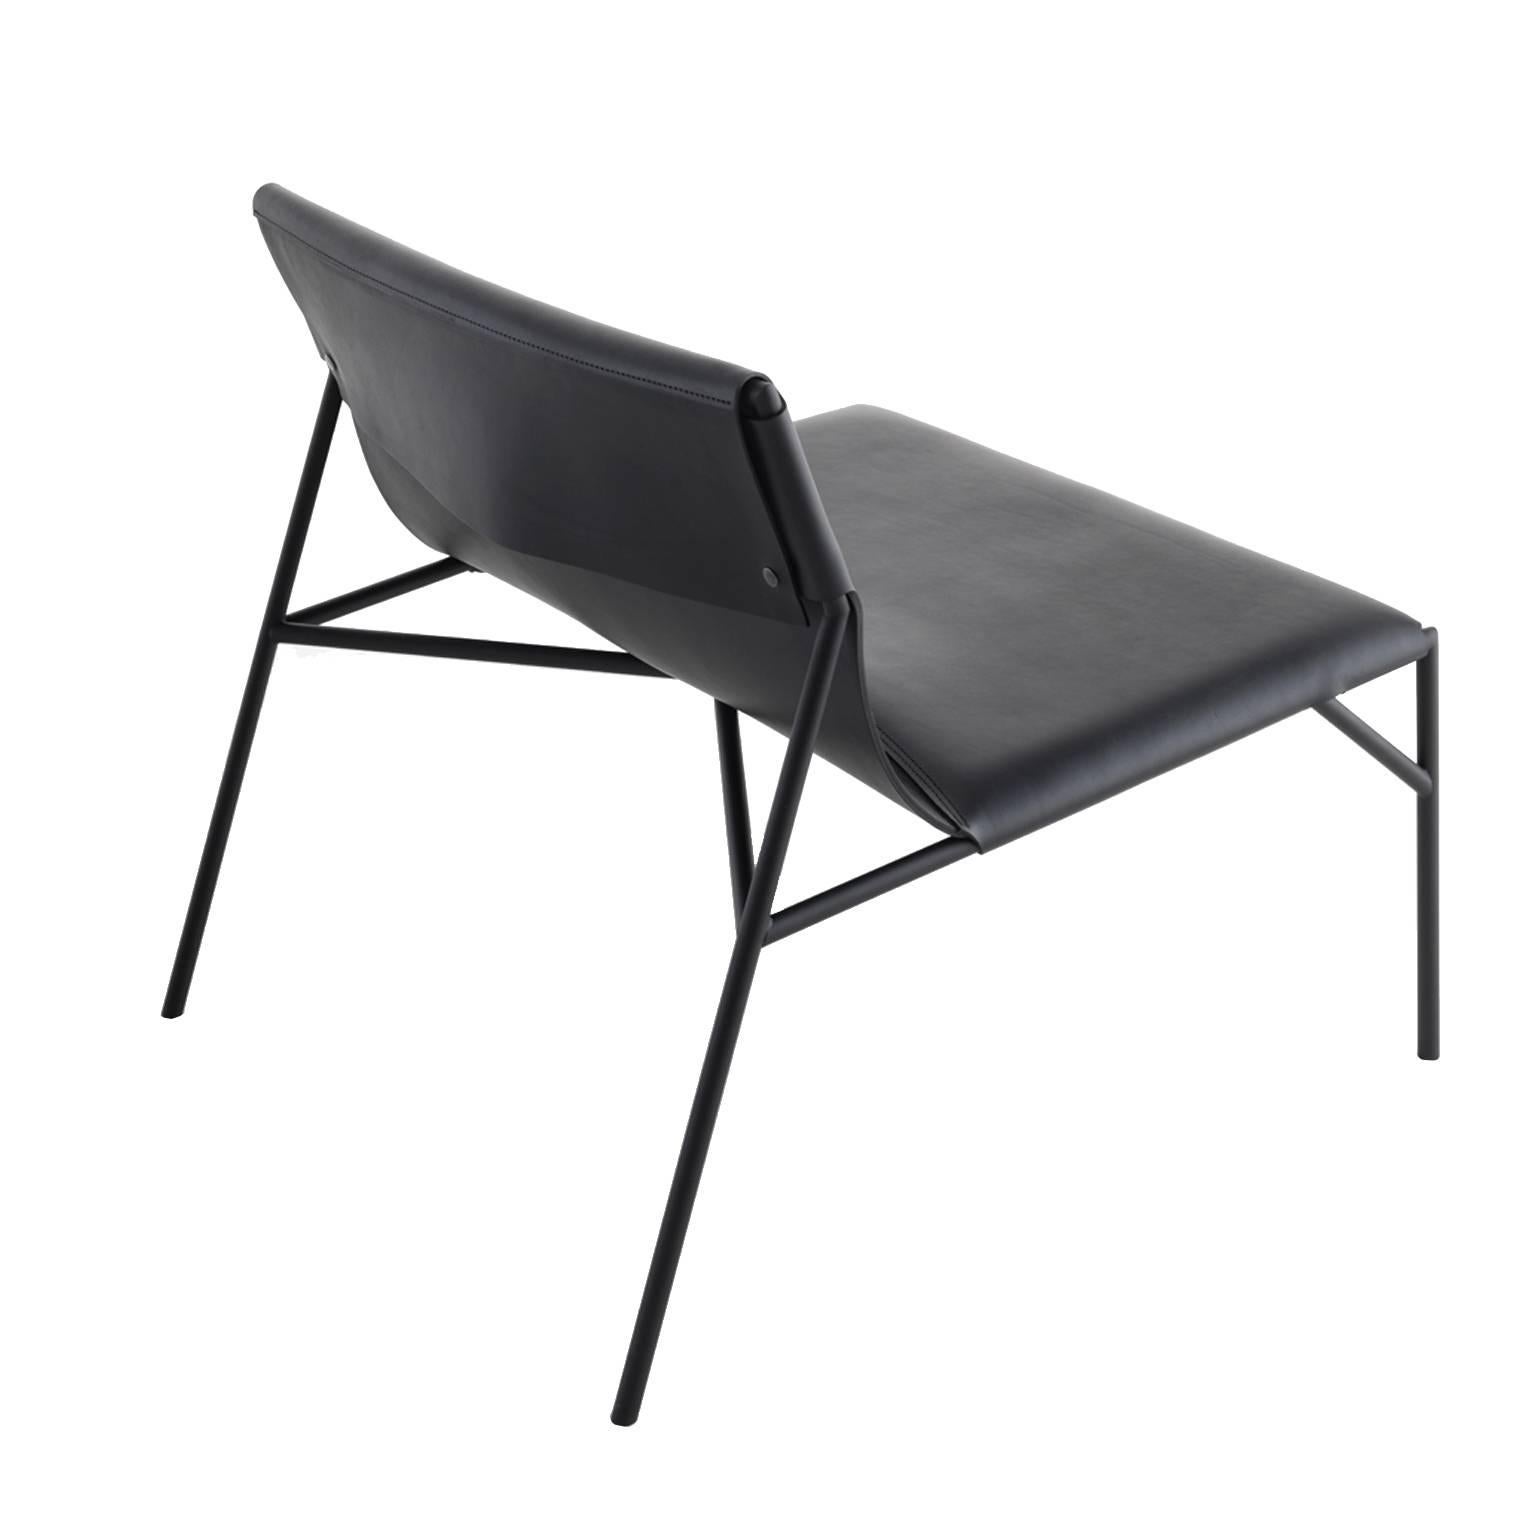 Steel structure with rubberized finish wrapped in black saddle leather, available from showroom display. 
Dimensions: 30 1/2